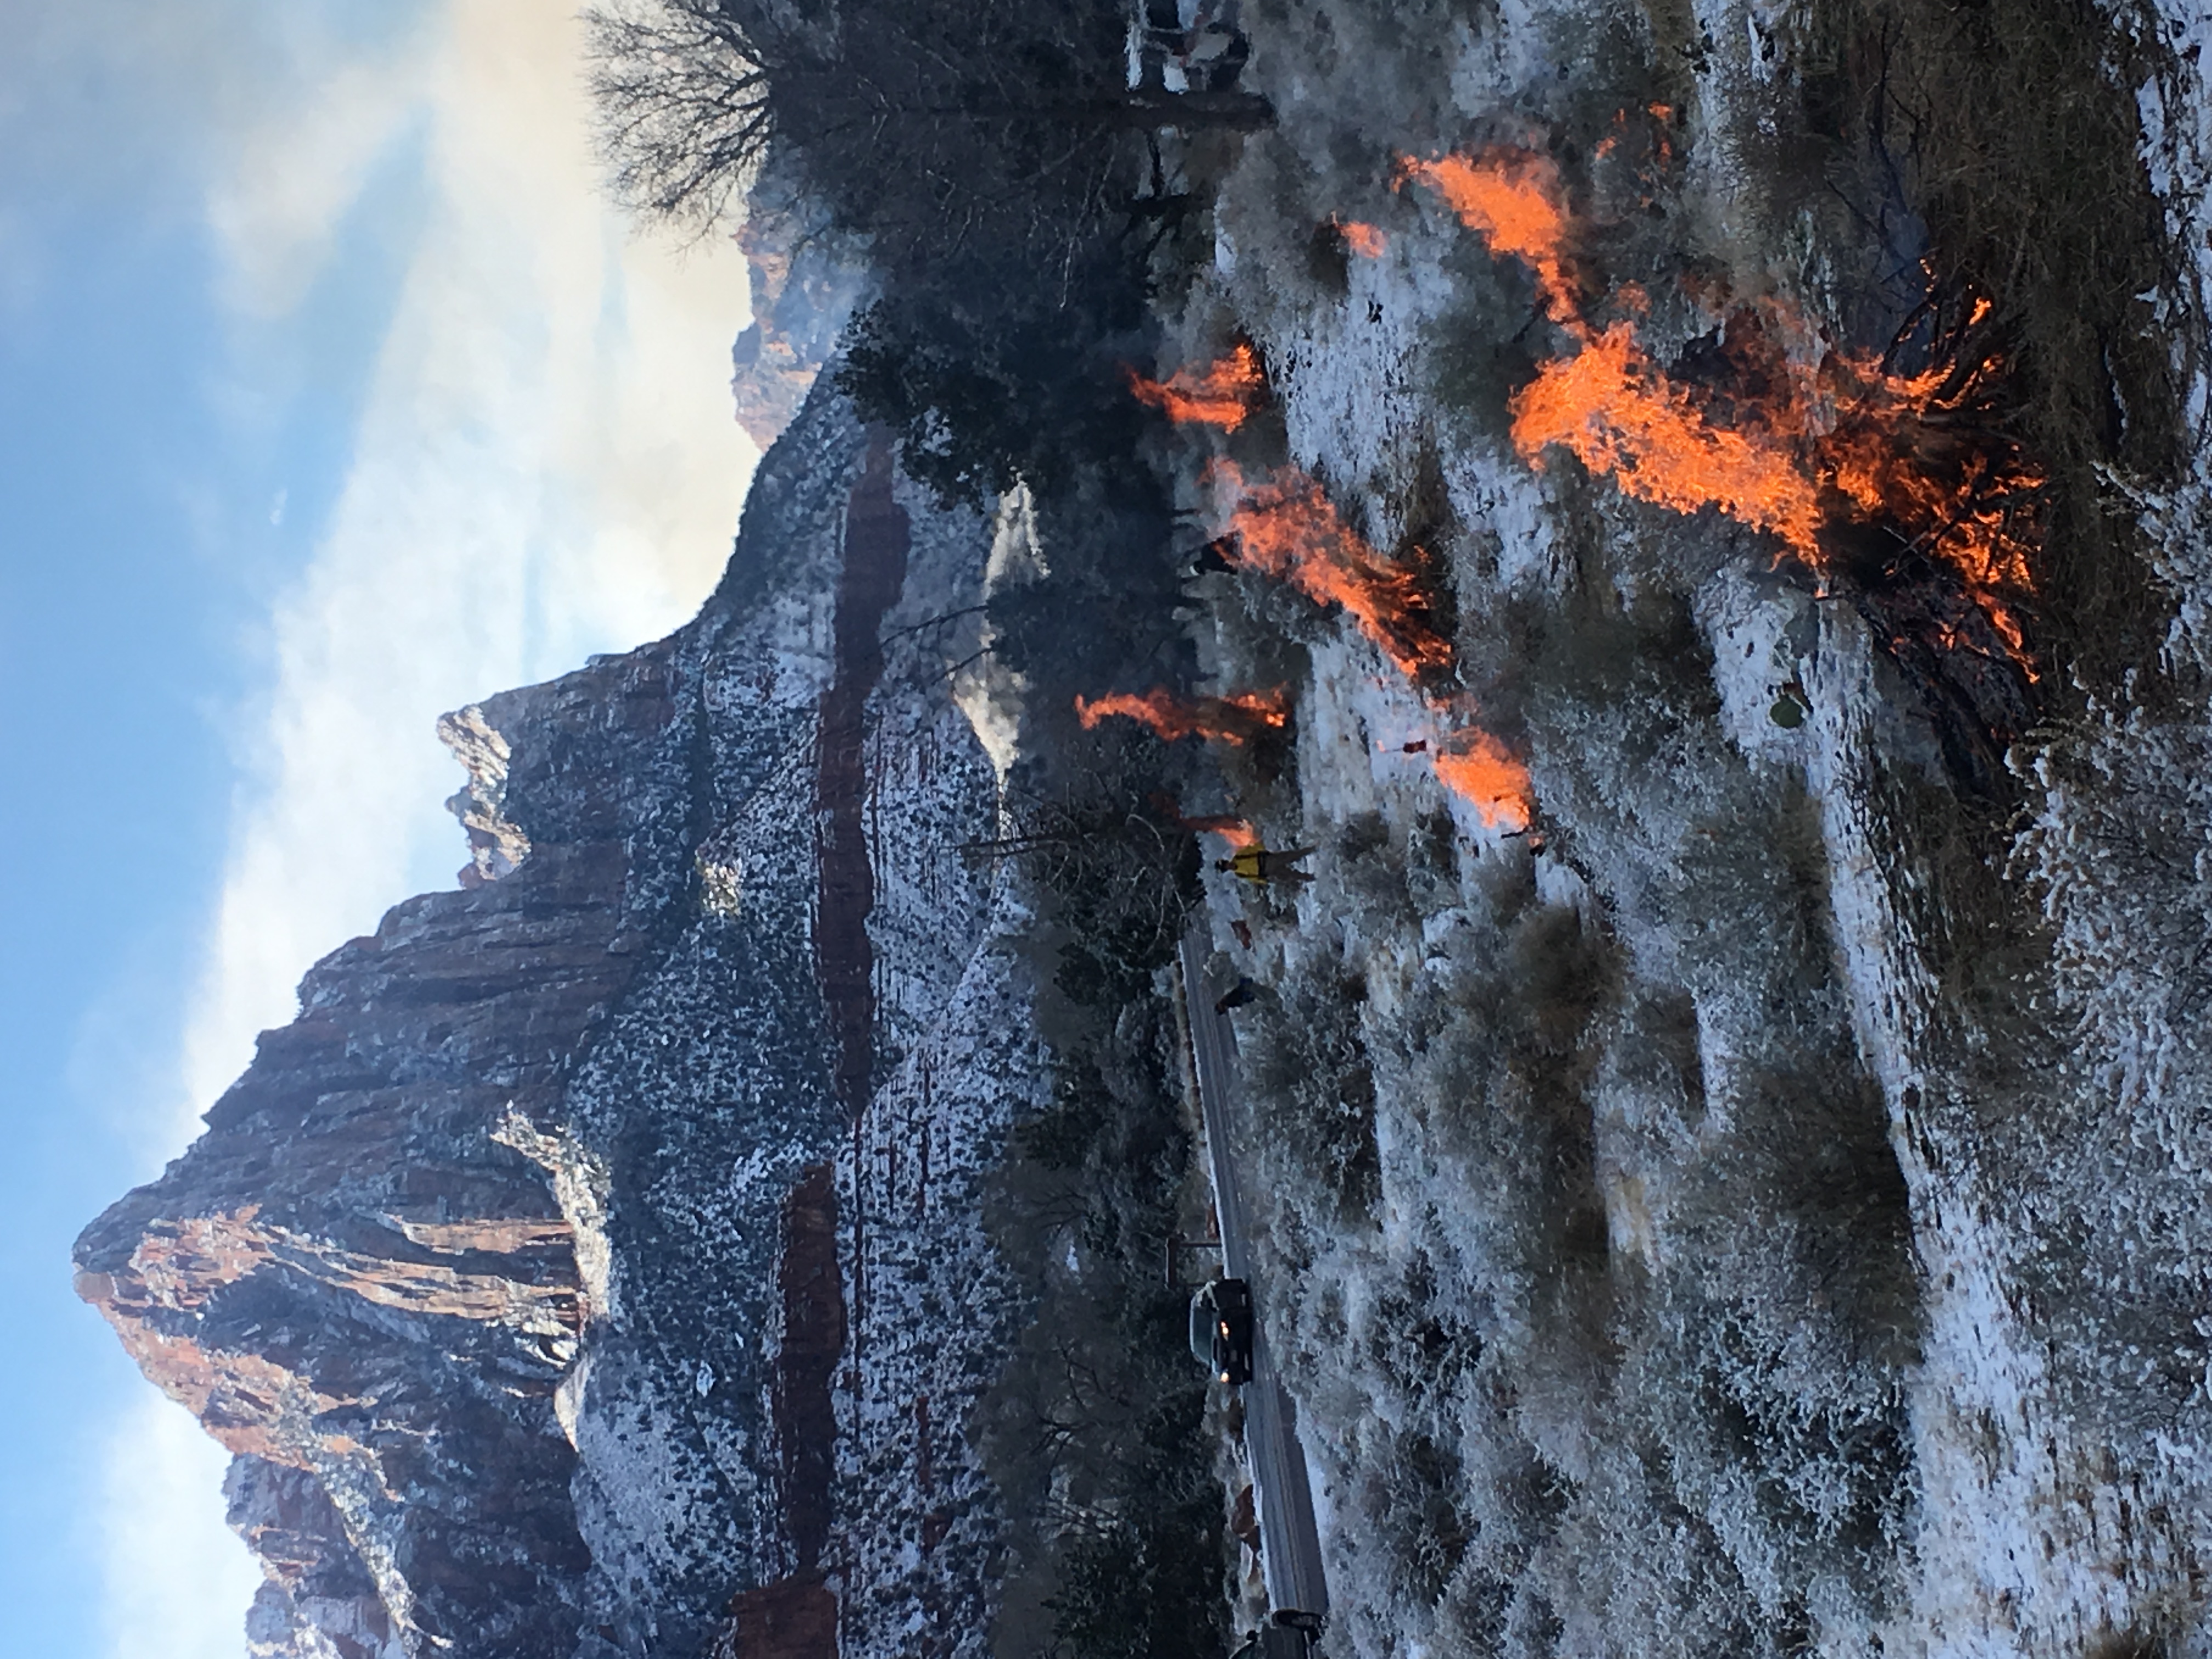 Several piles of debris are on fire in a snowy landscape with Watchman Peak in the background